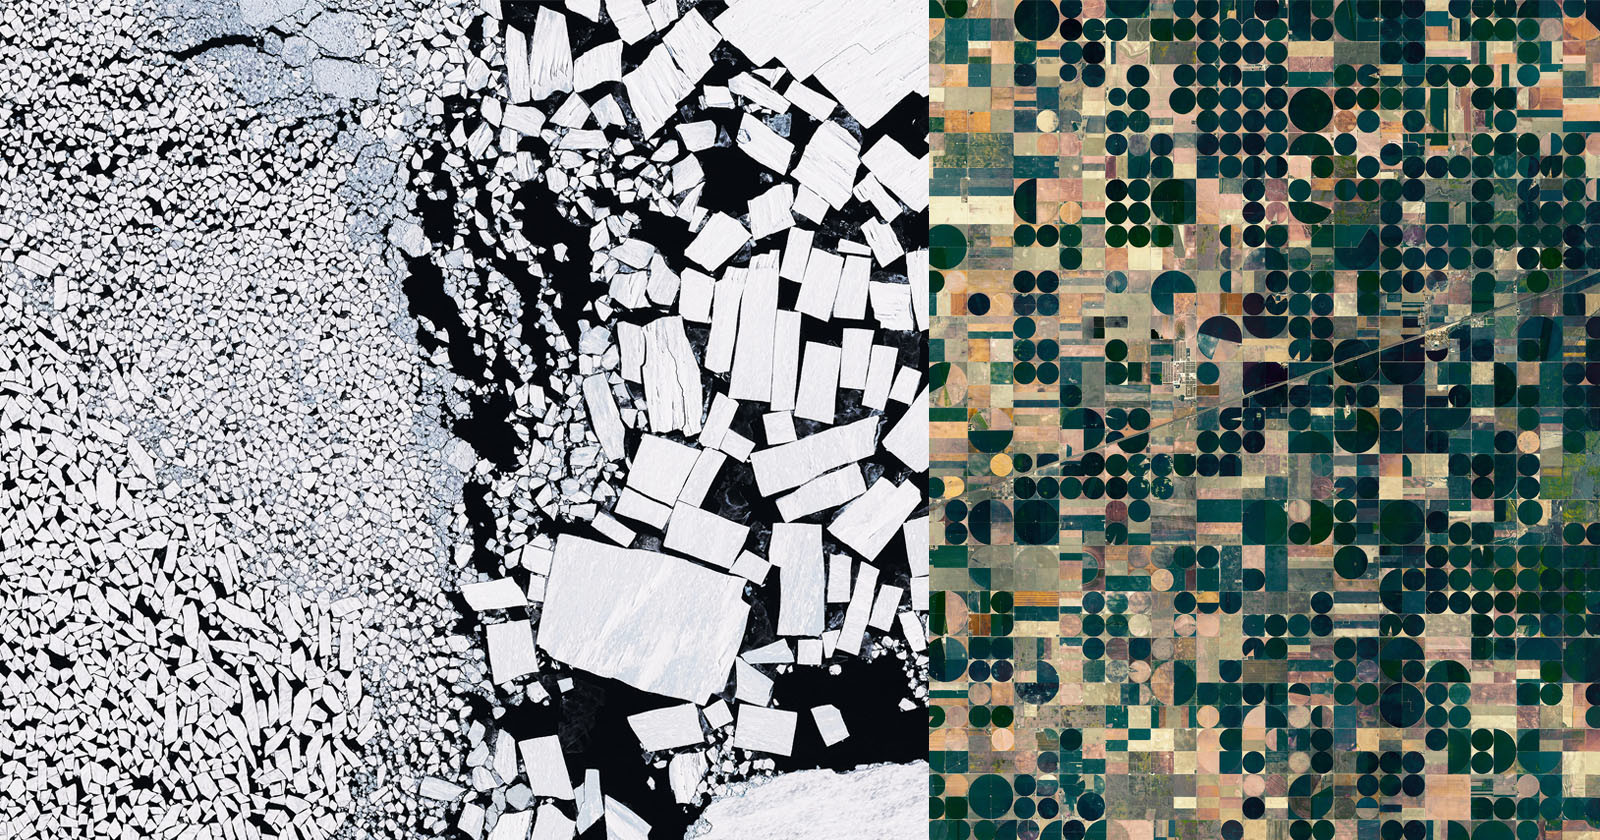 Stunning Instagram Page That Posts Satellite Images Moves Toward Video